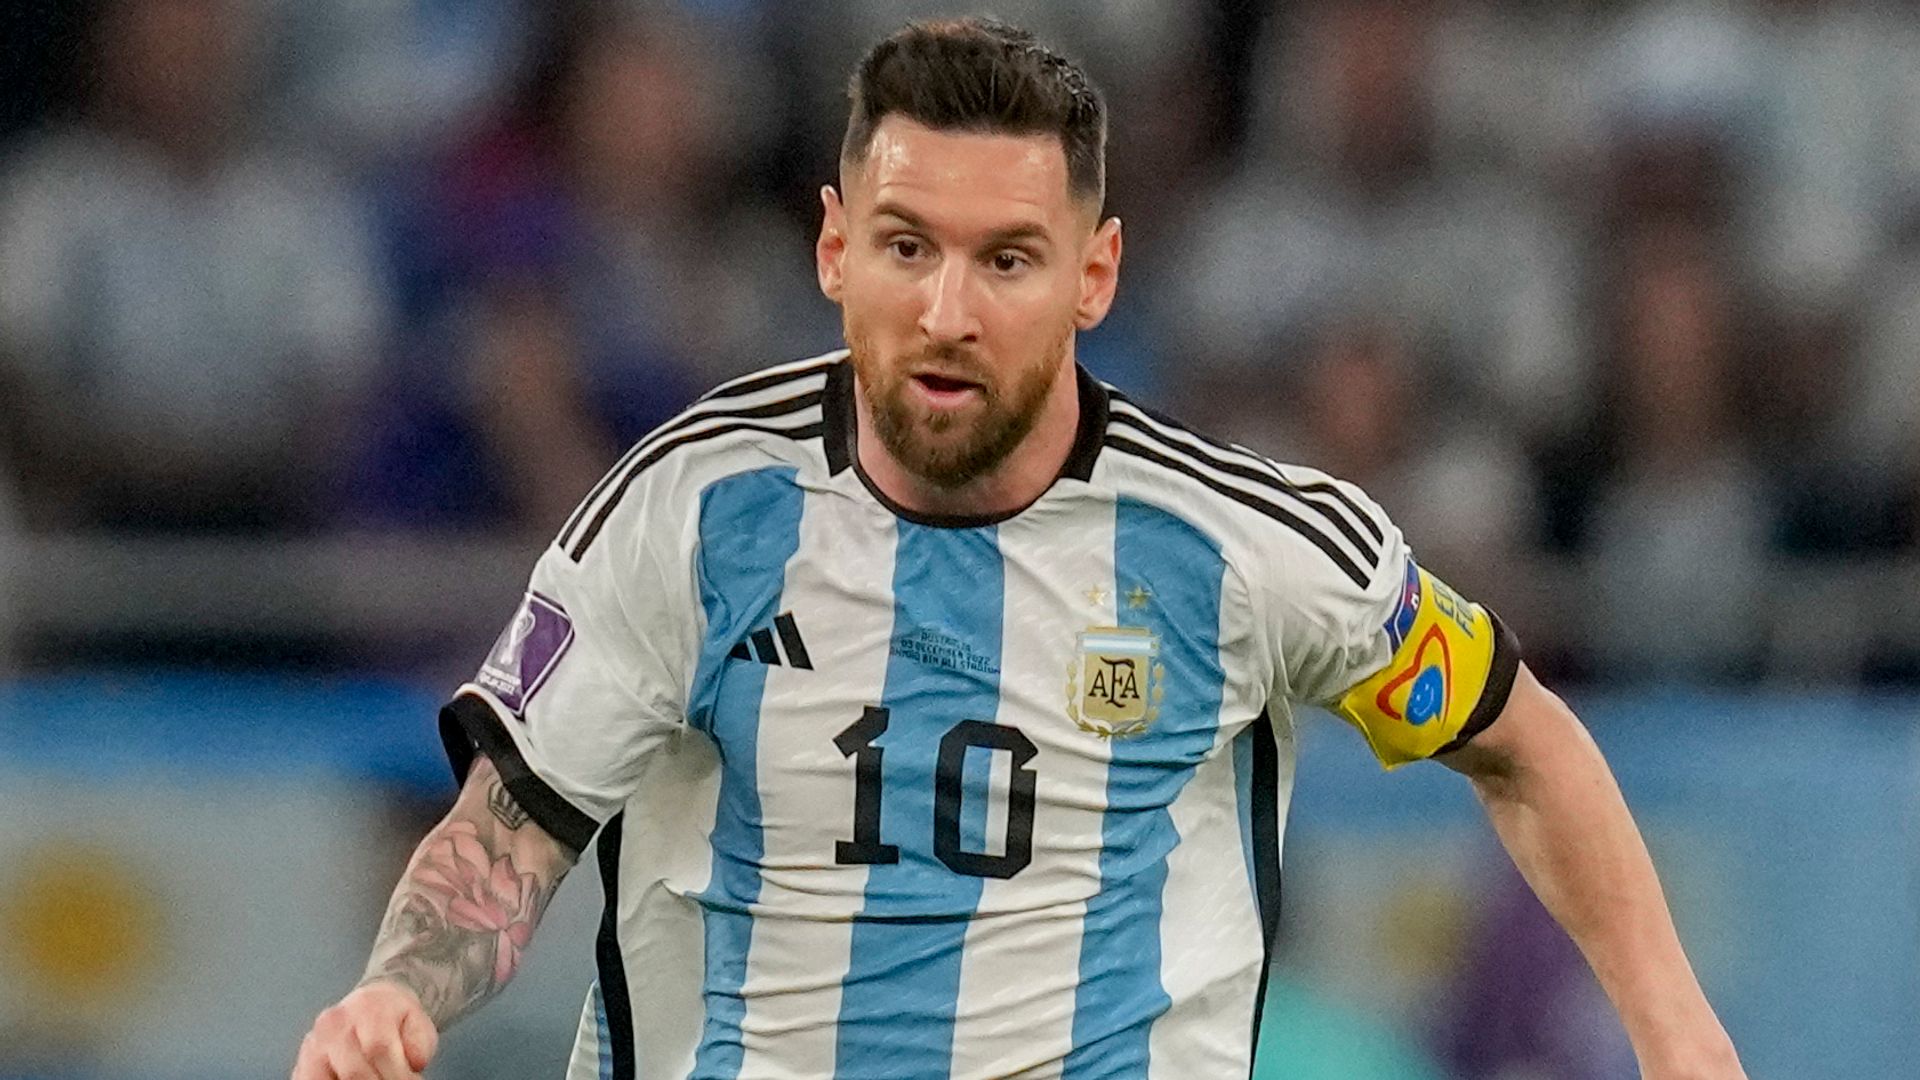 World Cup hits and misses: Messi magic | Van Gaal masterful